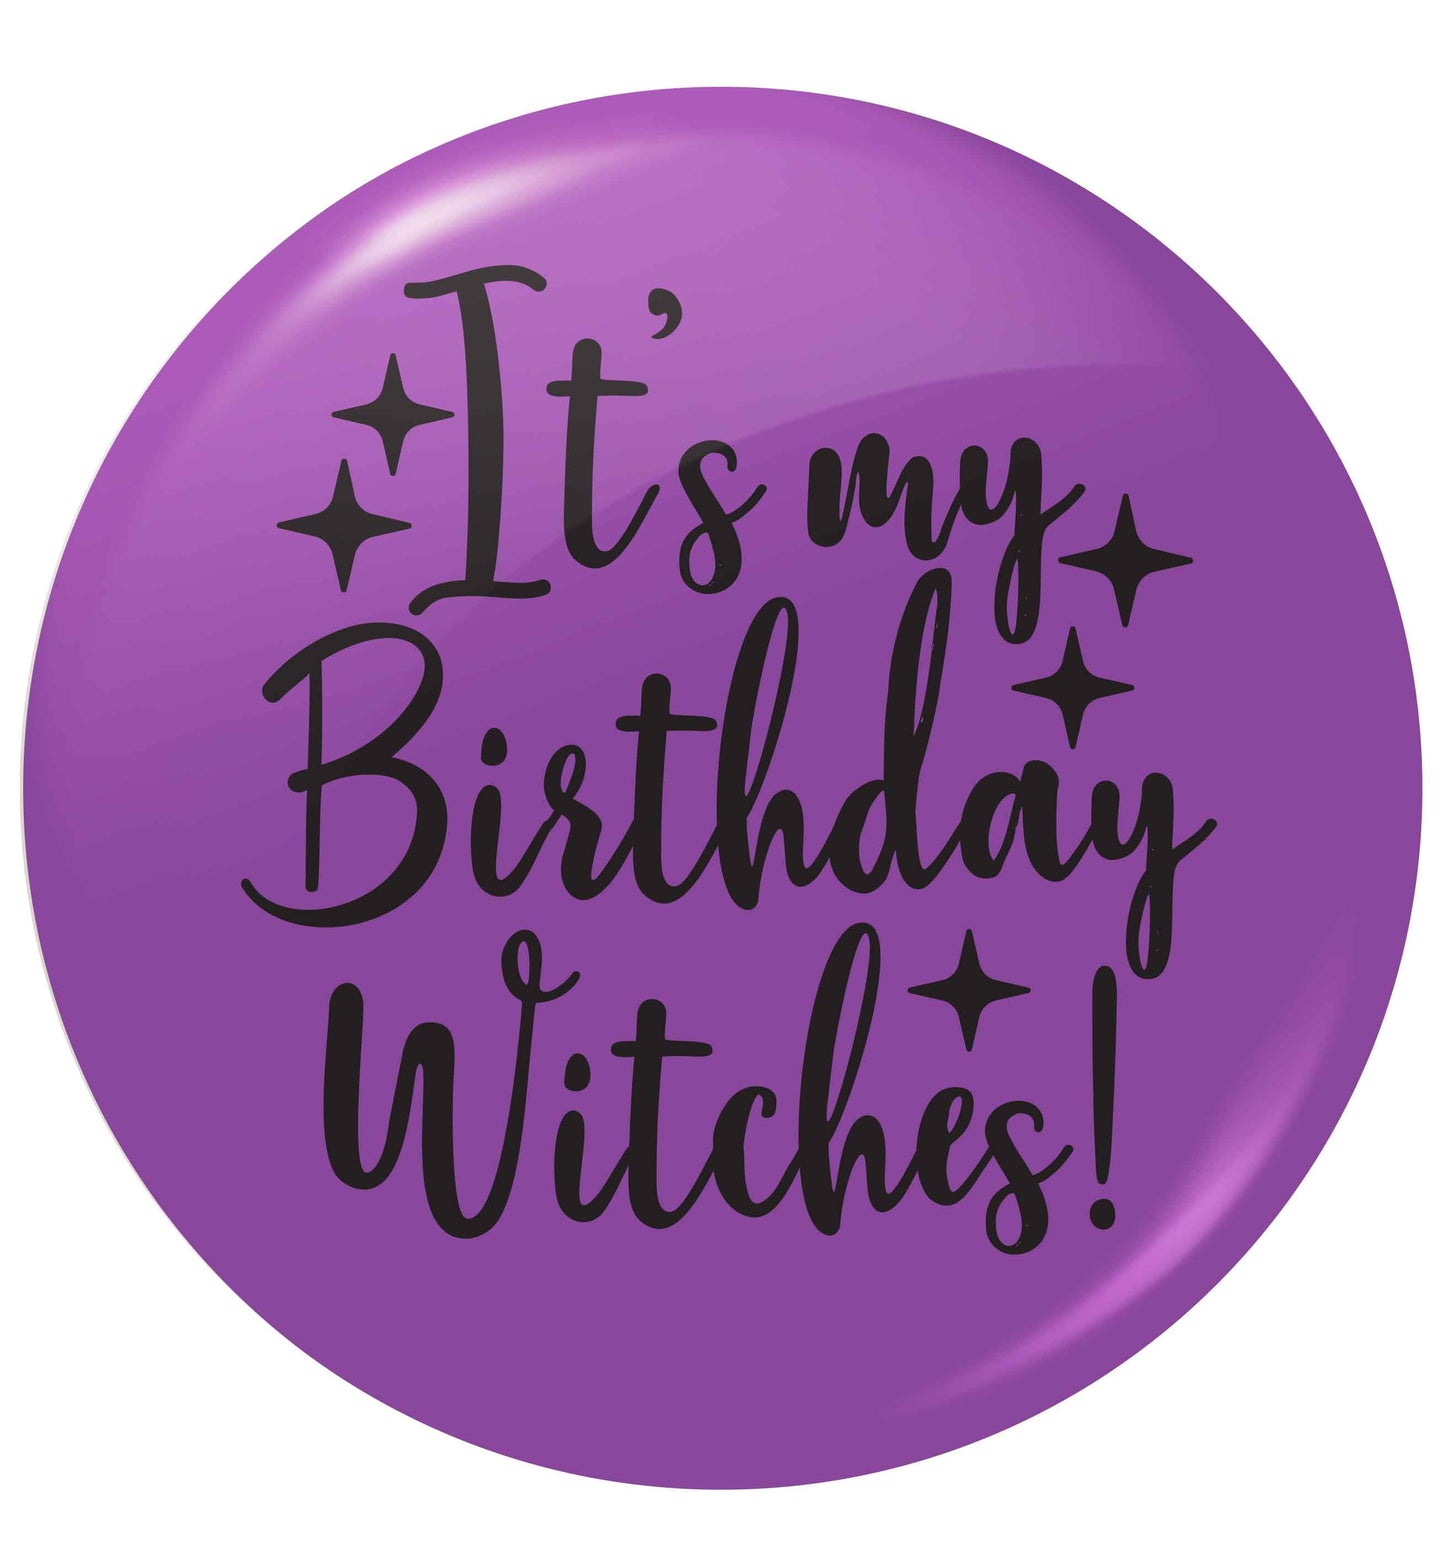 It's my birthday witches!small 25mm Pin badge